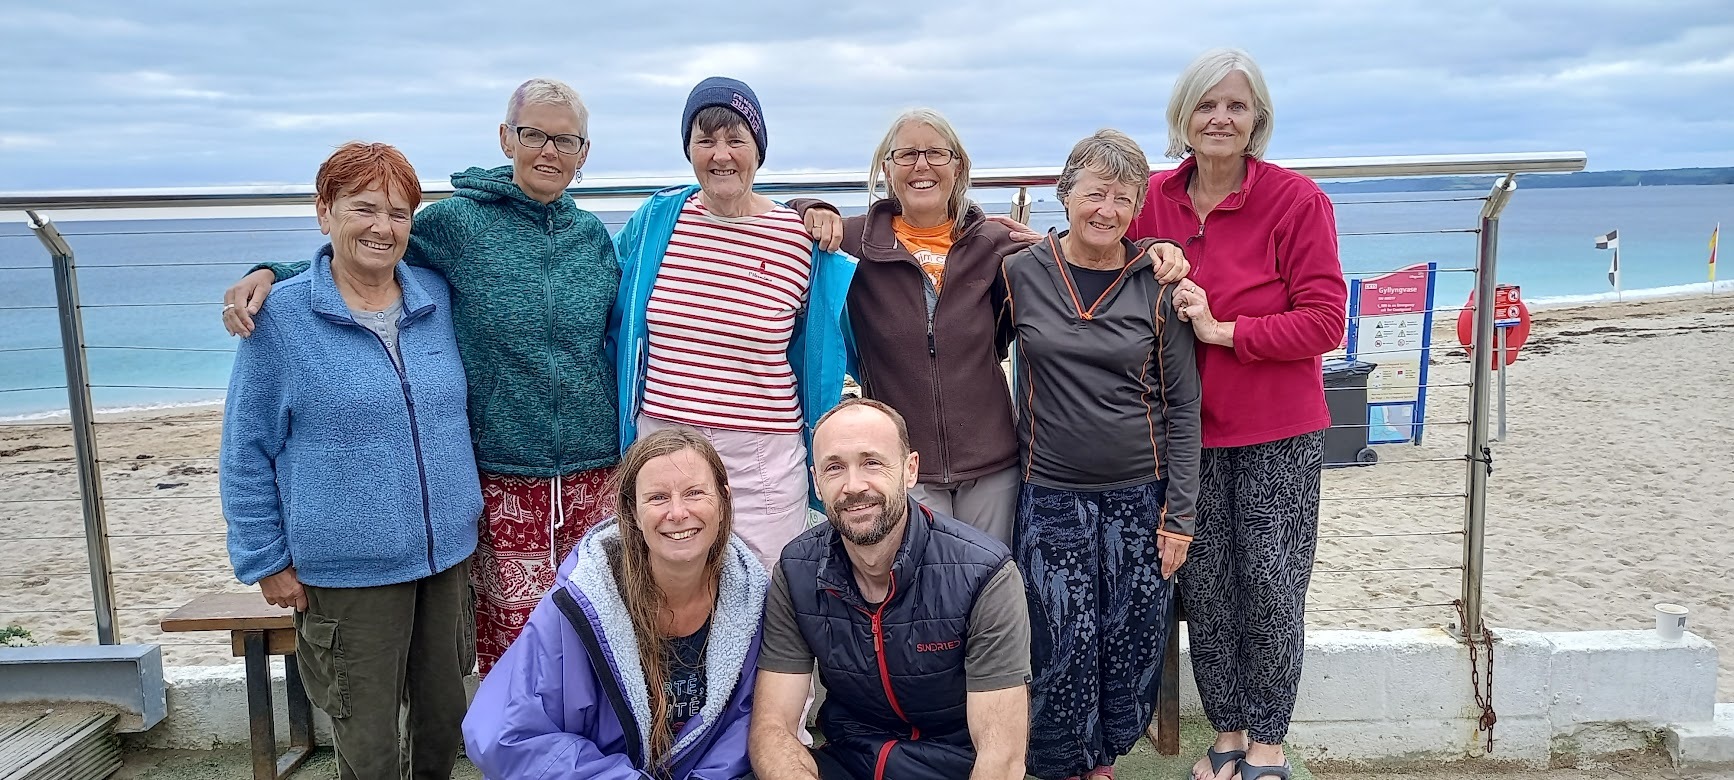 Jo Curd with her husband and members of her exercise group on Gylly Beach